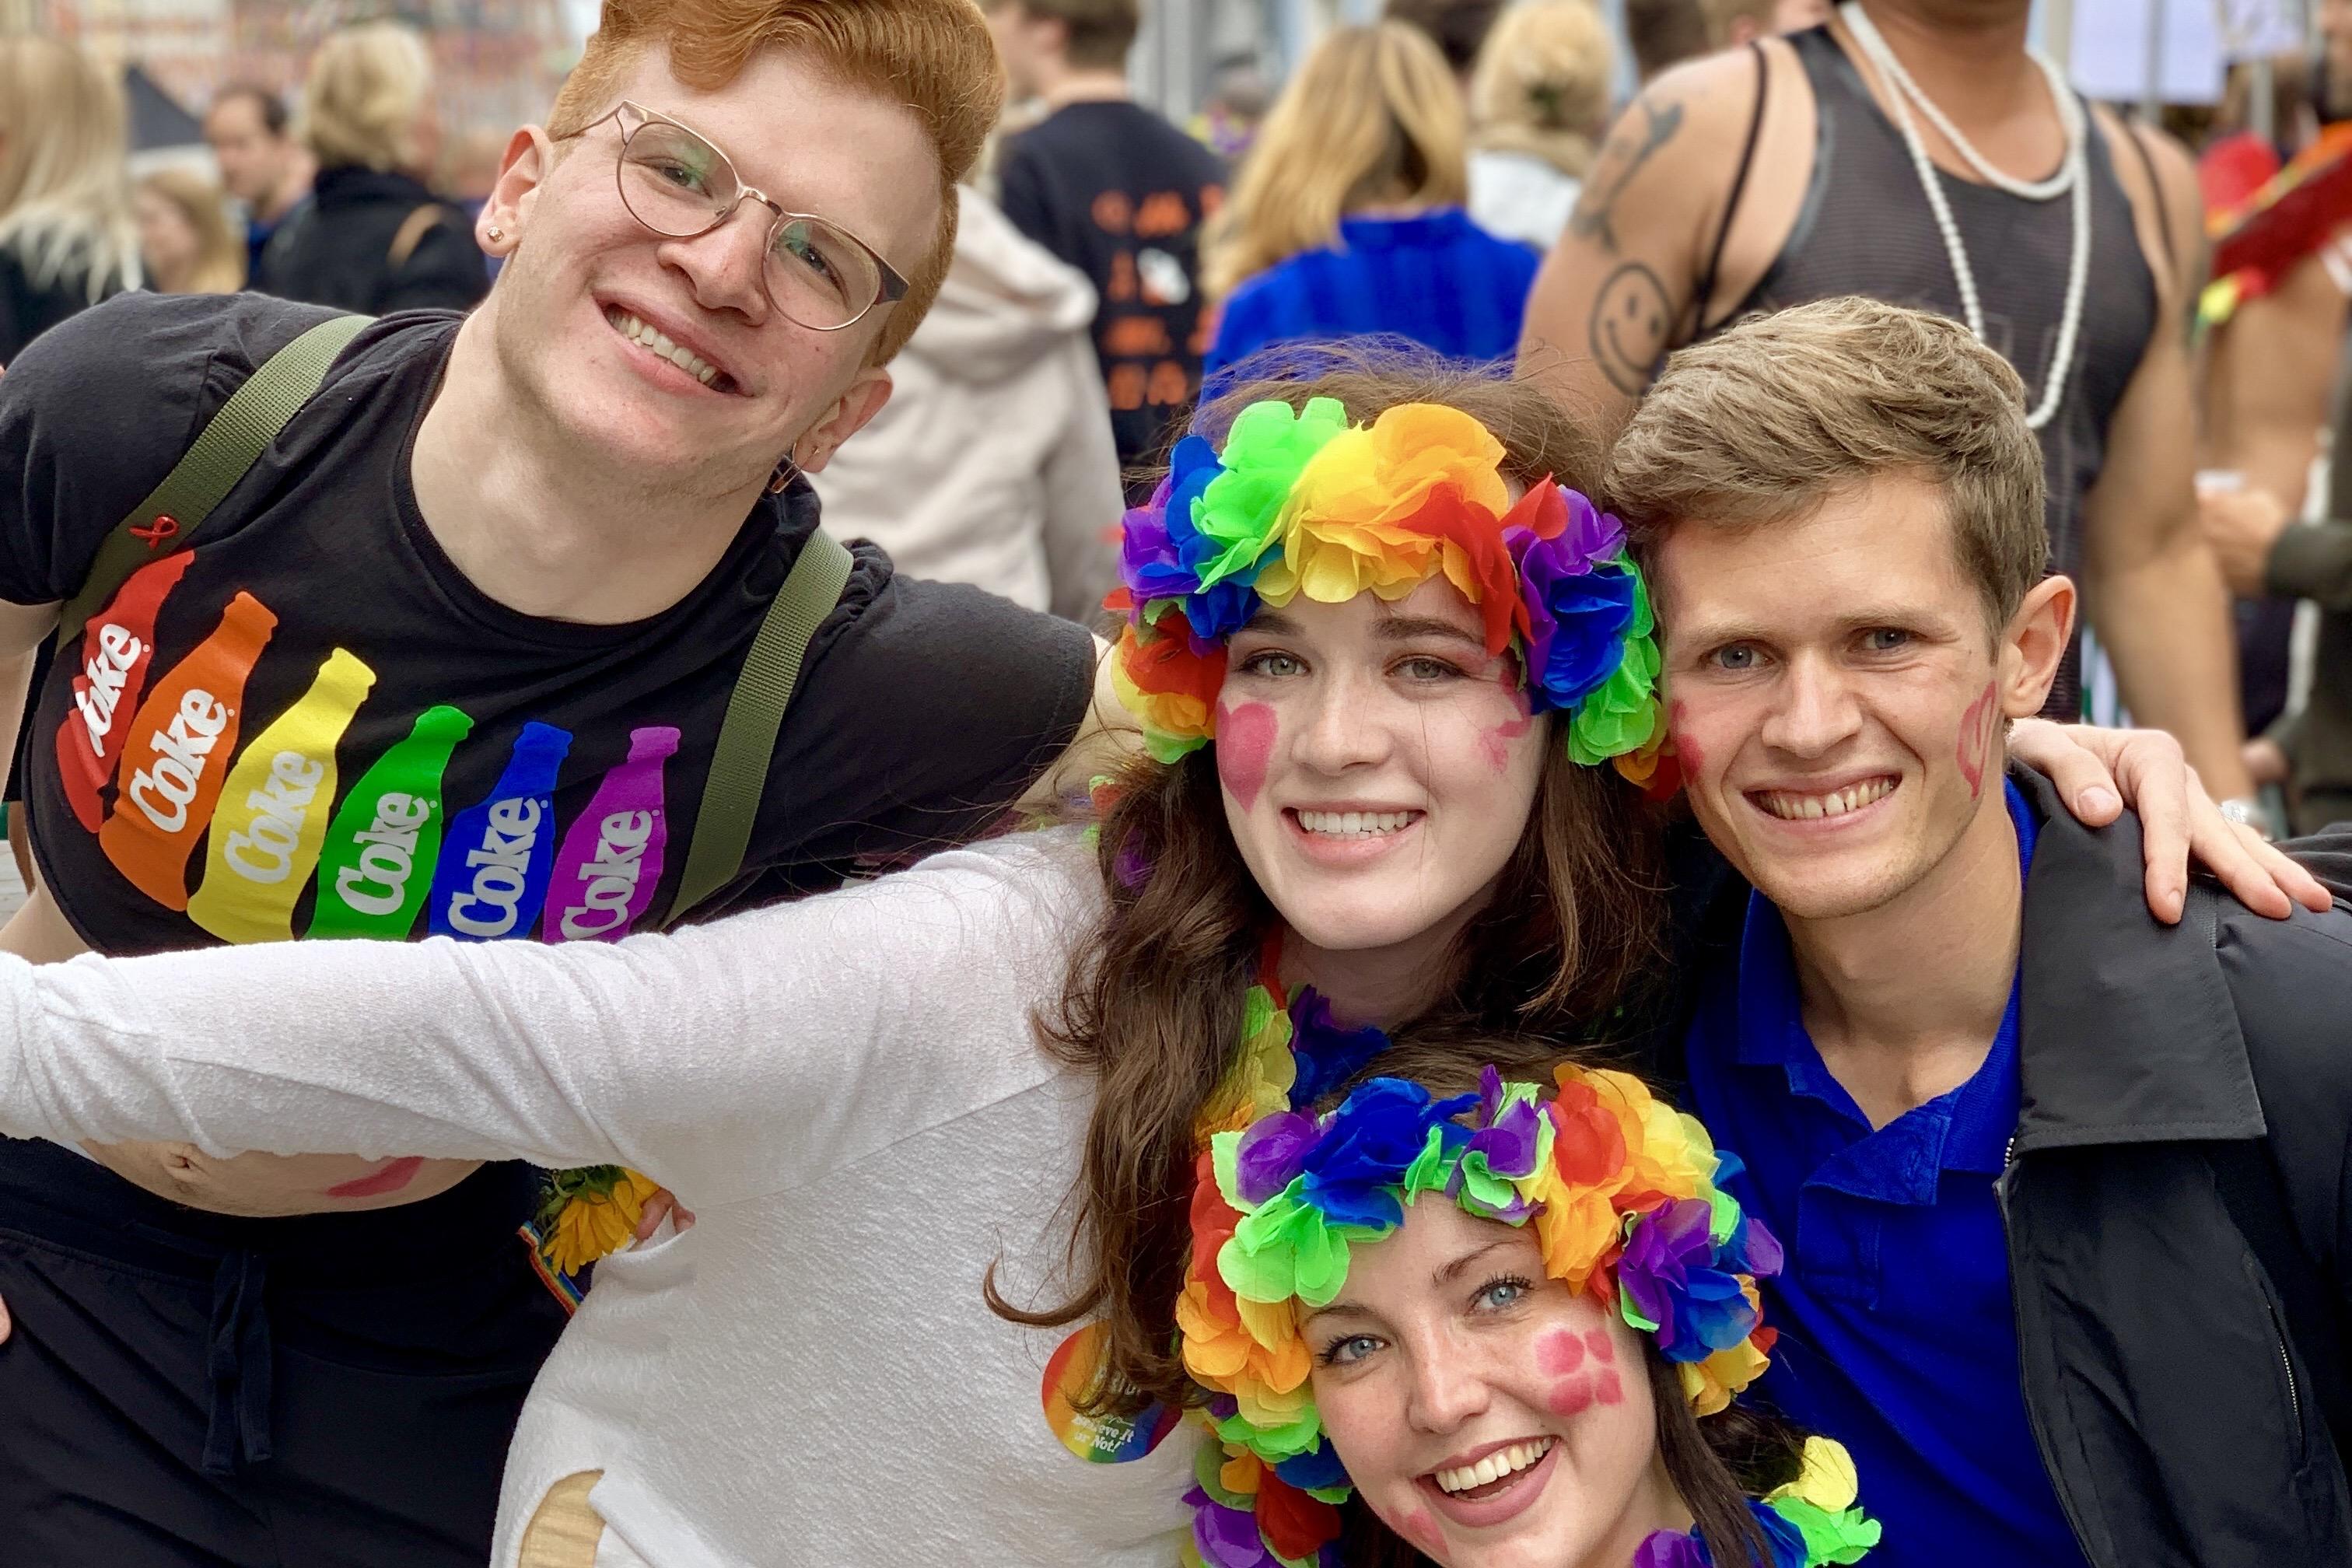 Four students celebrating a the Copenhagen Pride Parade. They wear rainbow leis and clothes.